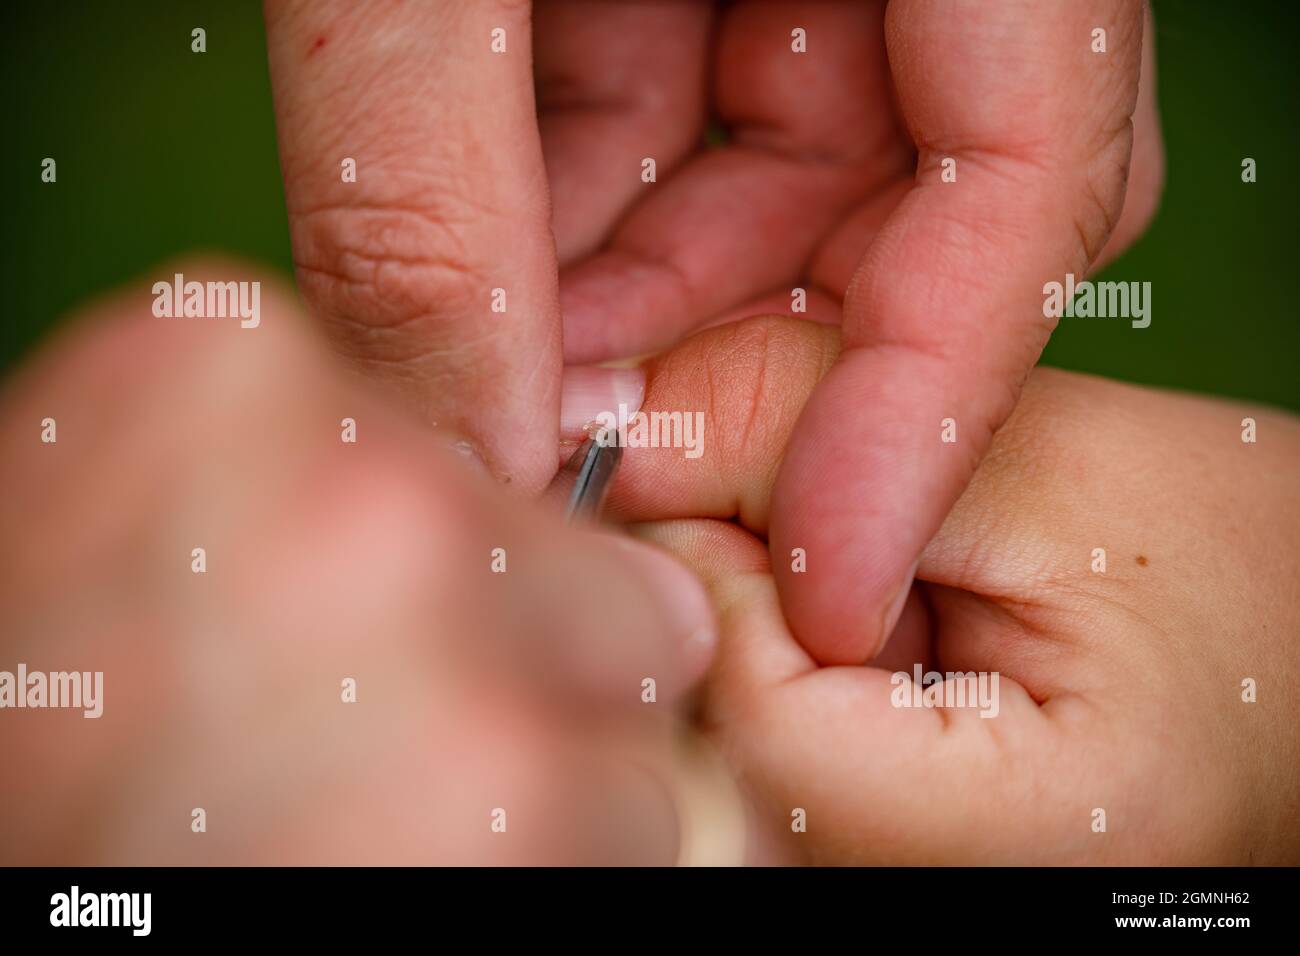 fingernail and manicure at a hand Stock Photo